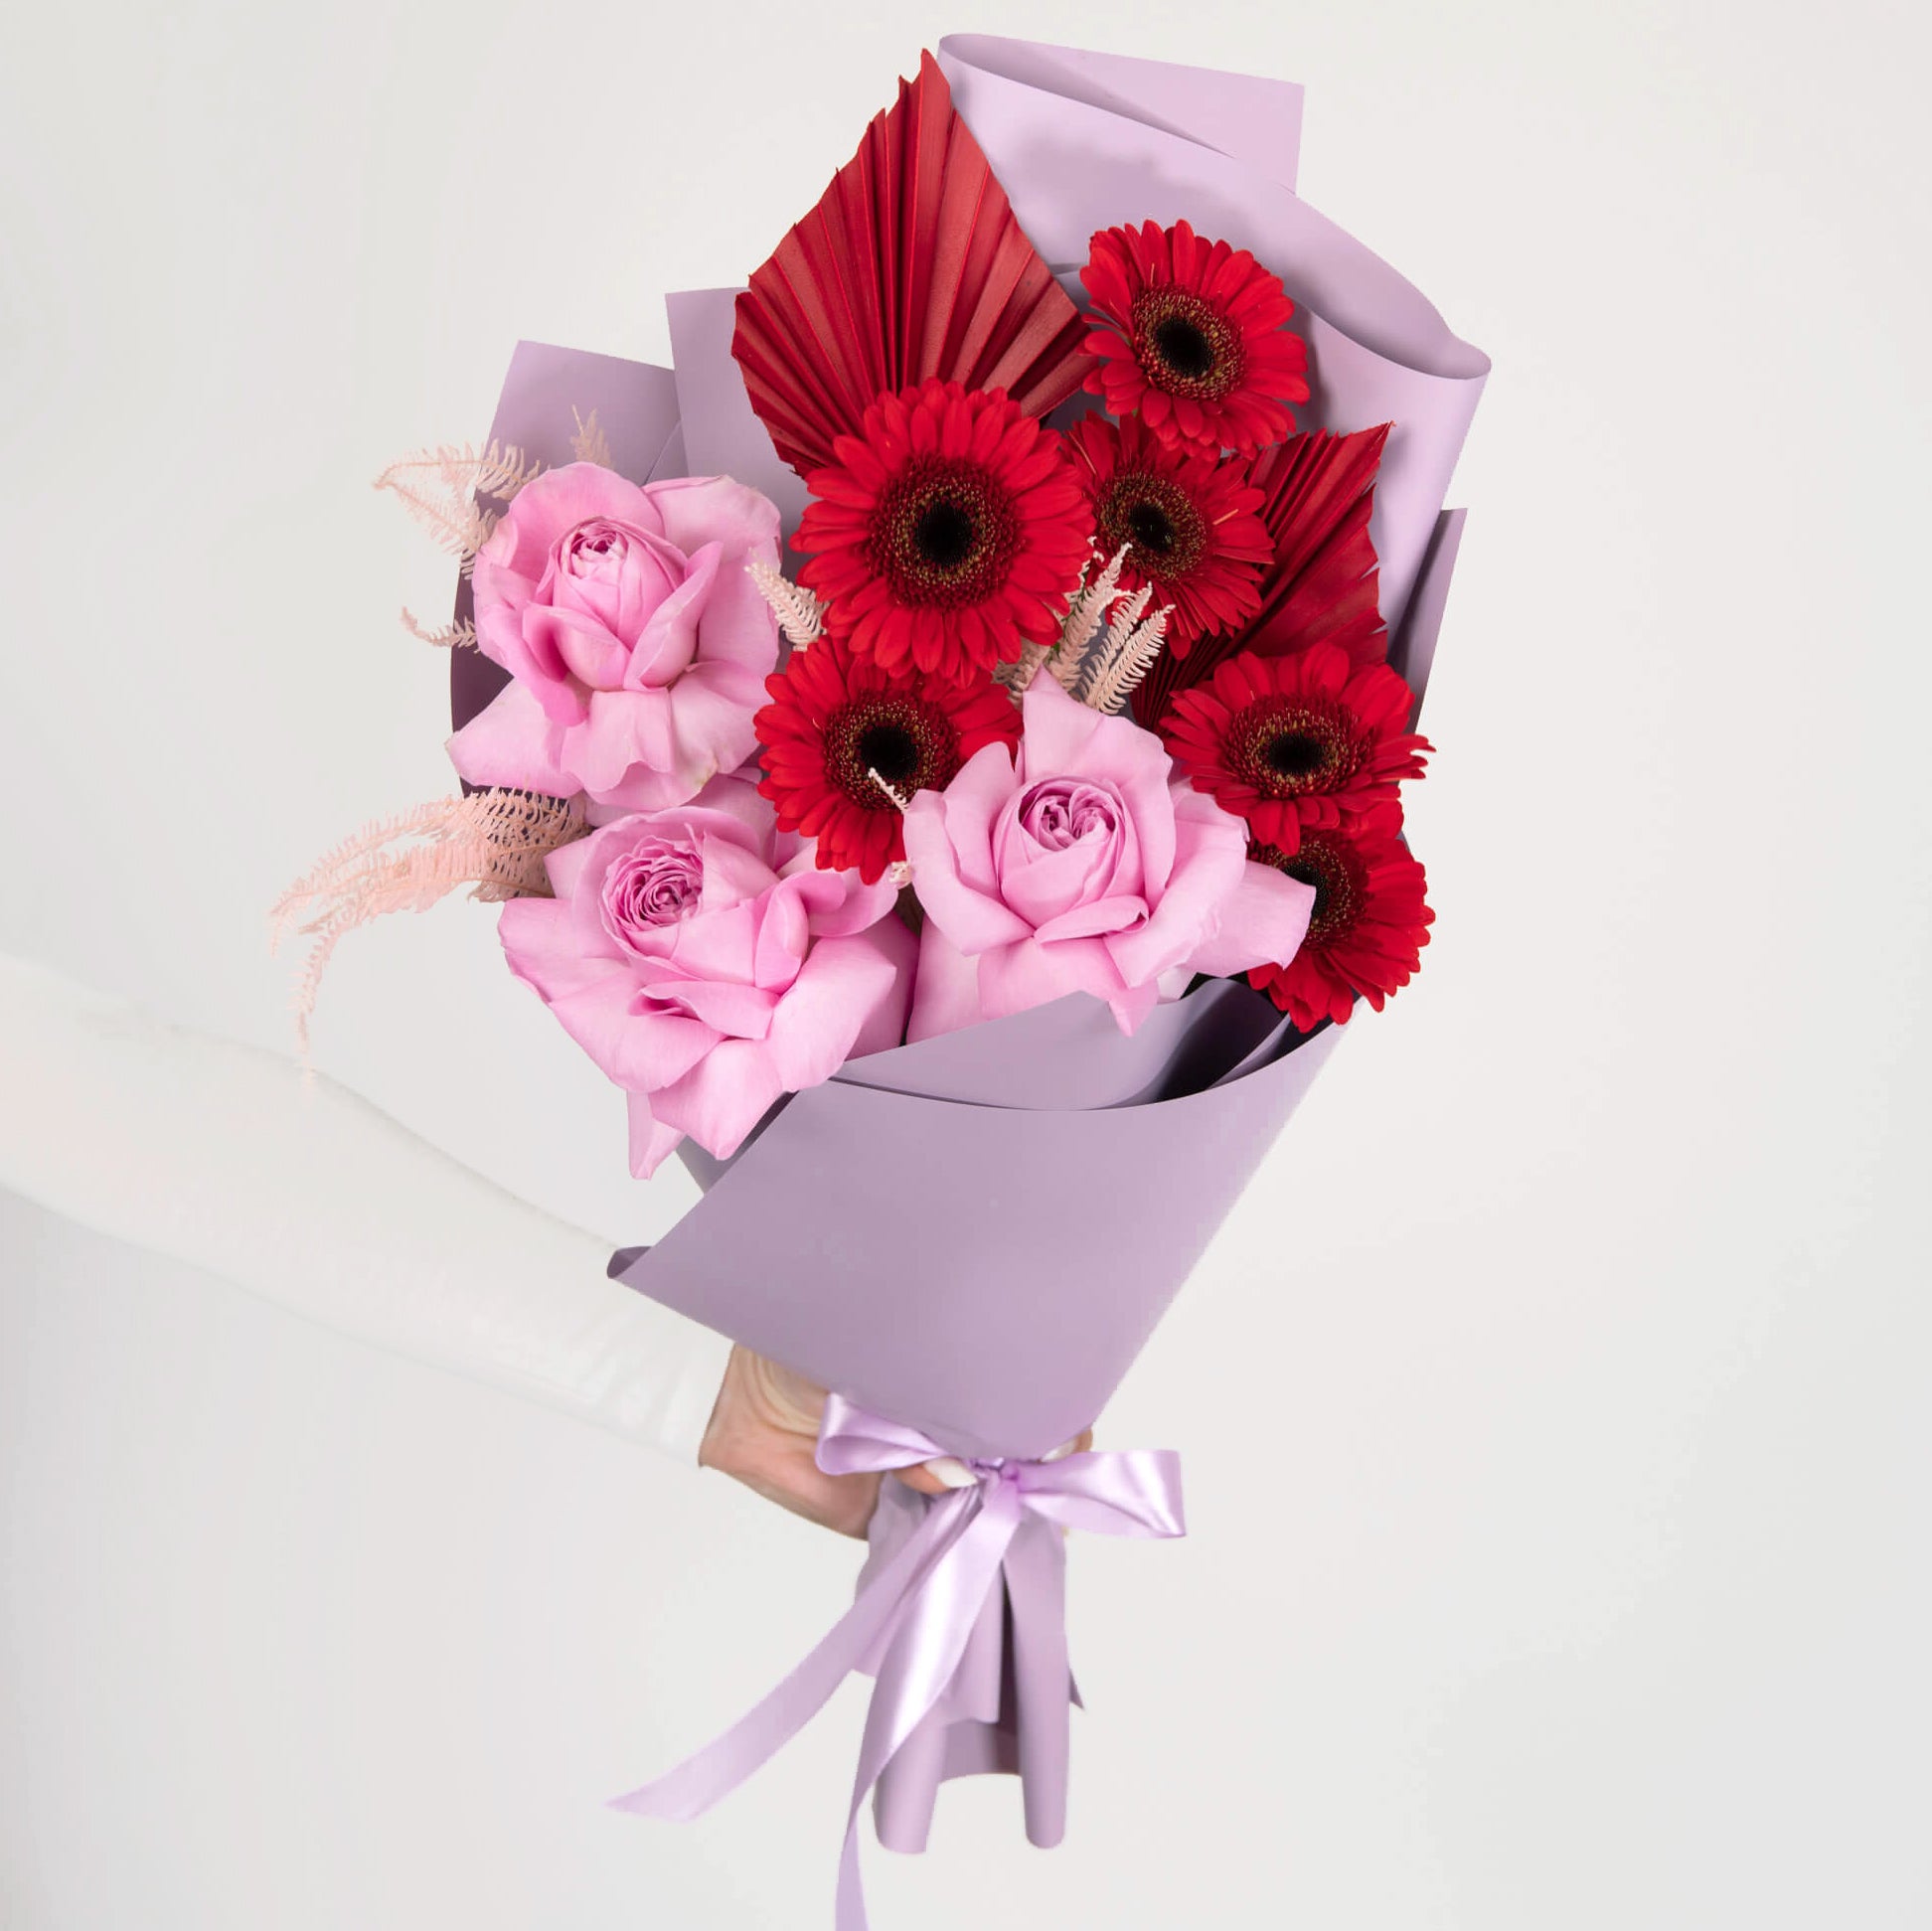 Bouquet with pink roses and gerbera